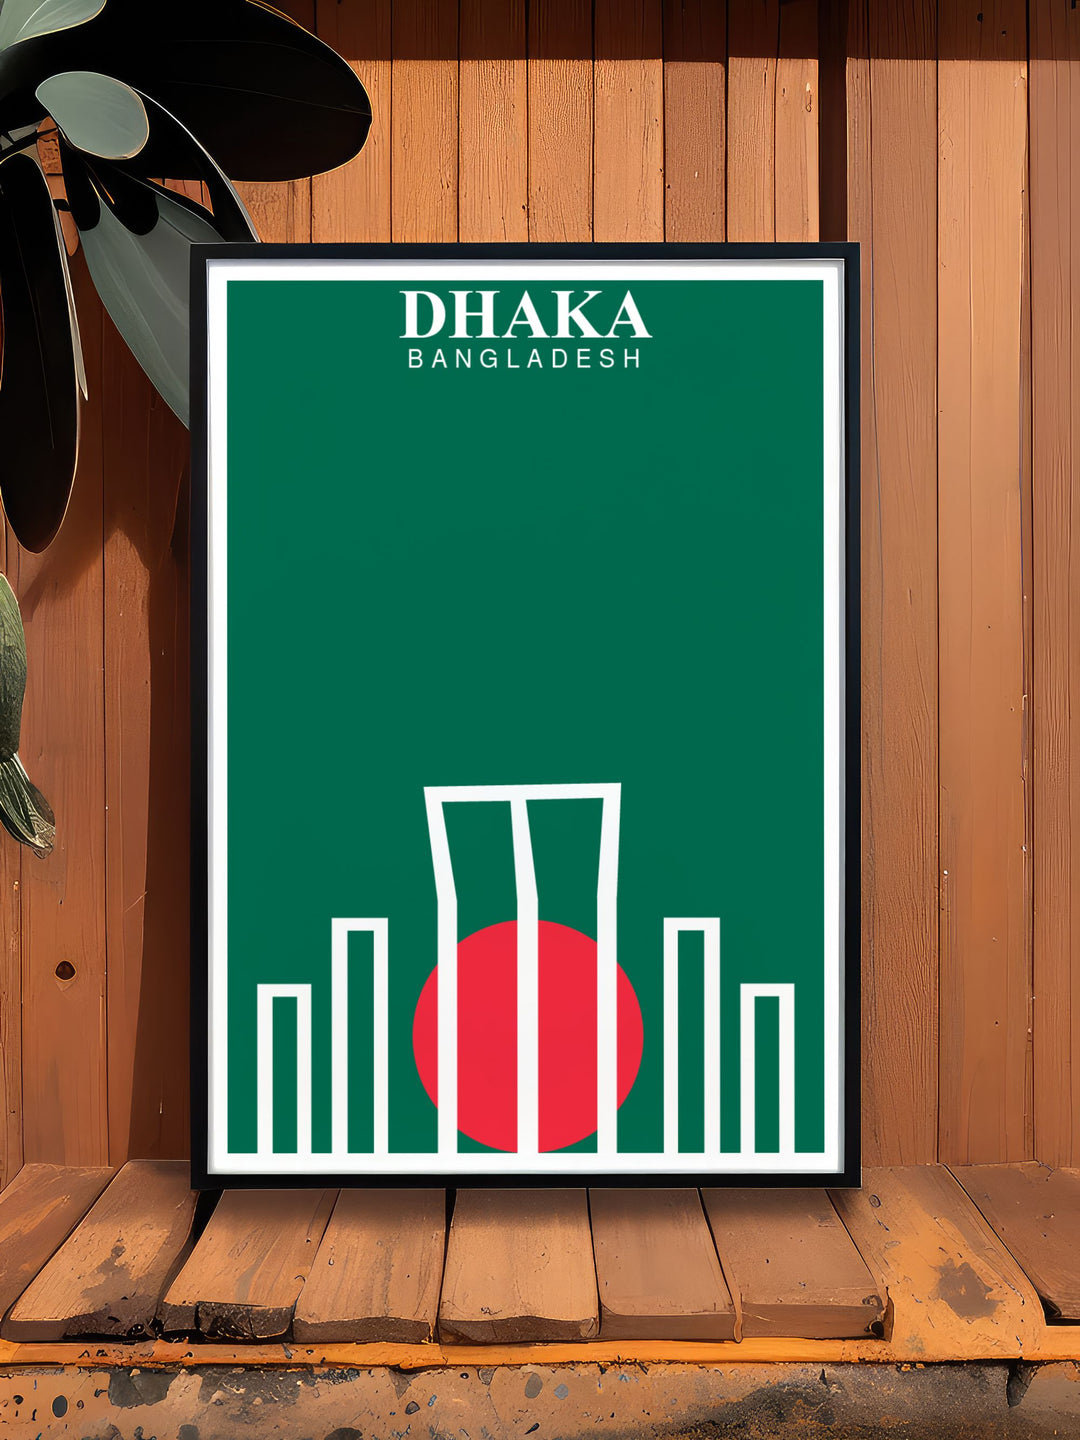 Beautiful Shaheed Minar Photo showcasing the monument's iconic architecture and symbolic meaning. This Shaheed Minar print is perfect for enhancing your home decor and makes an excellent gift for anniversaries birthdays or Christmas celebrating Dhakas heritage.